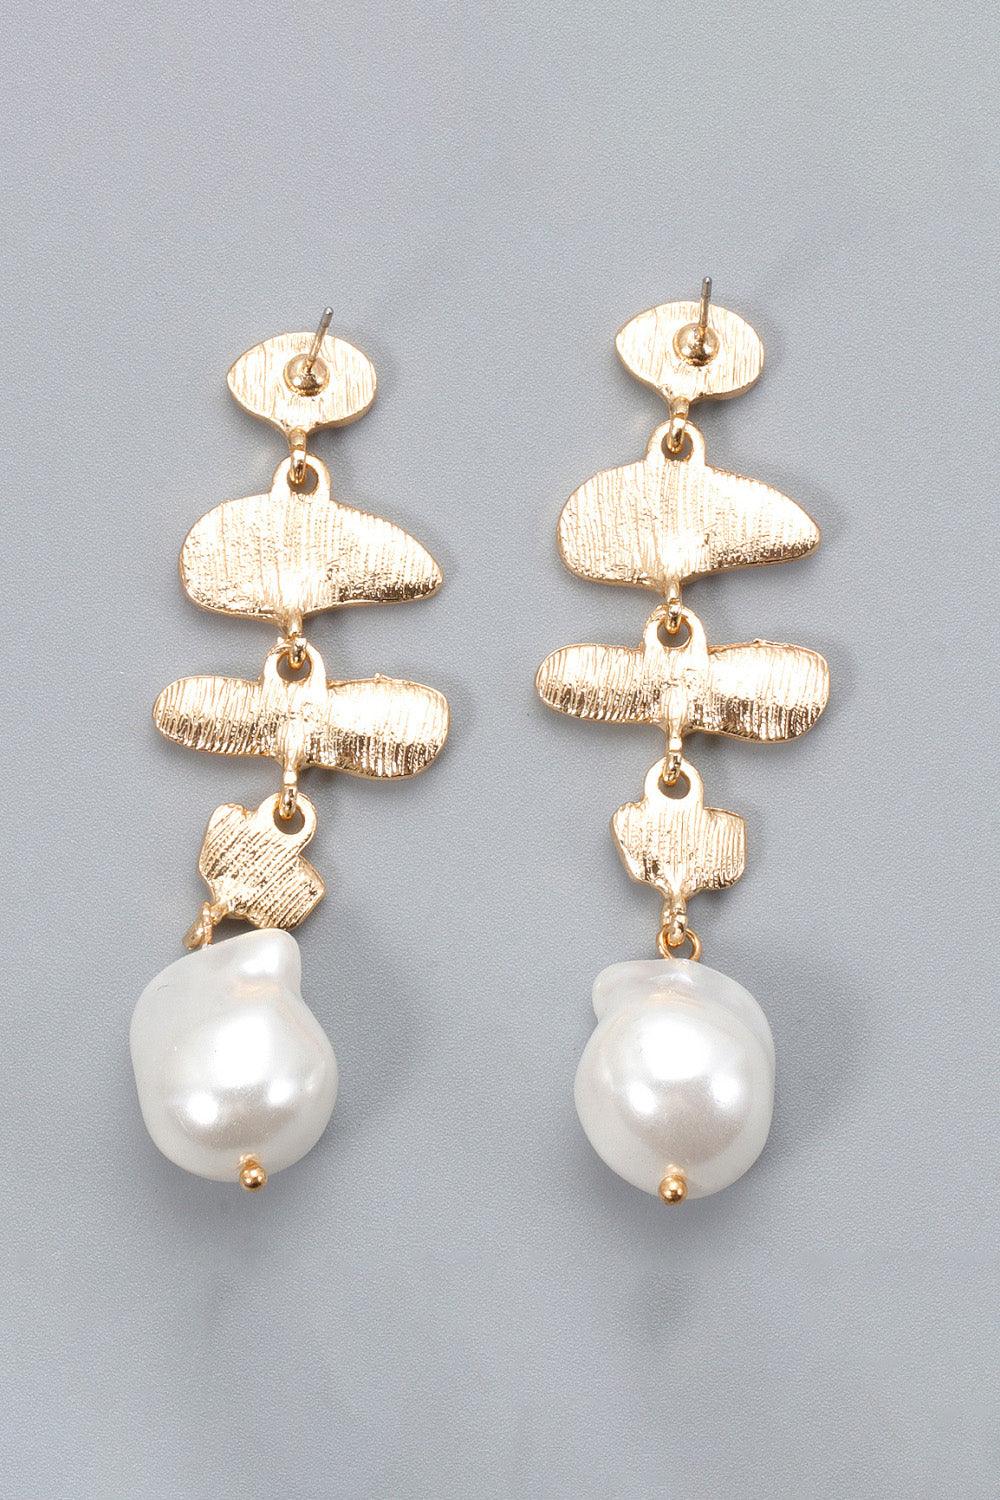 Abnormal Shpae Zinc Alloy Synthetic Pearl Dangle Earrings - Crazy Like a Daisy Boutique #